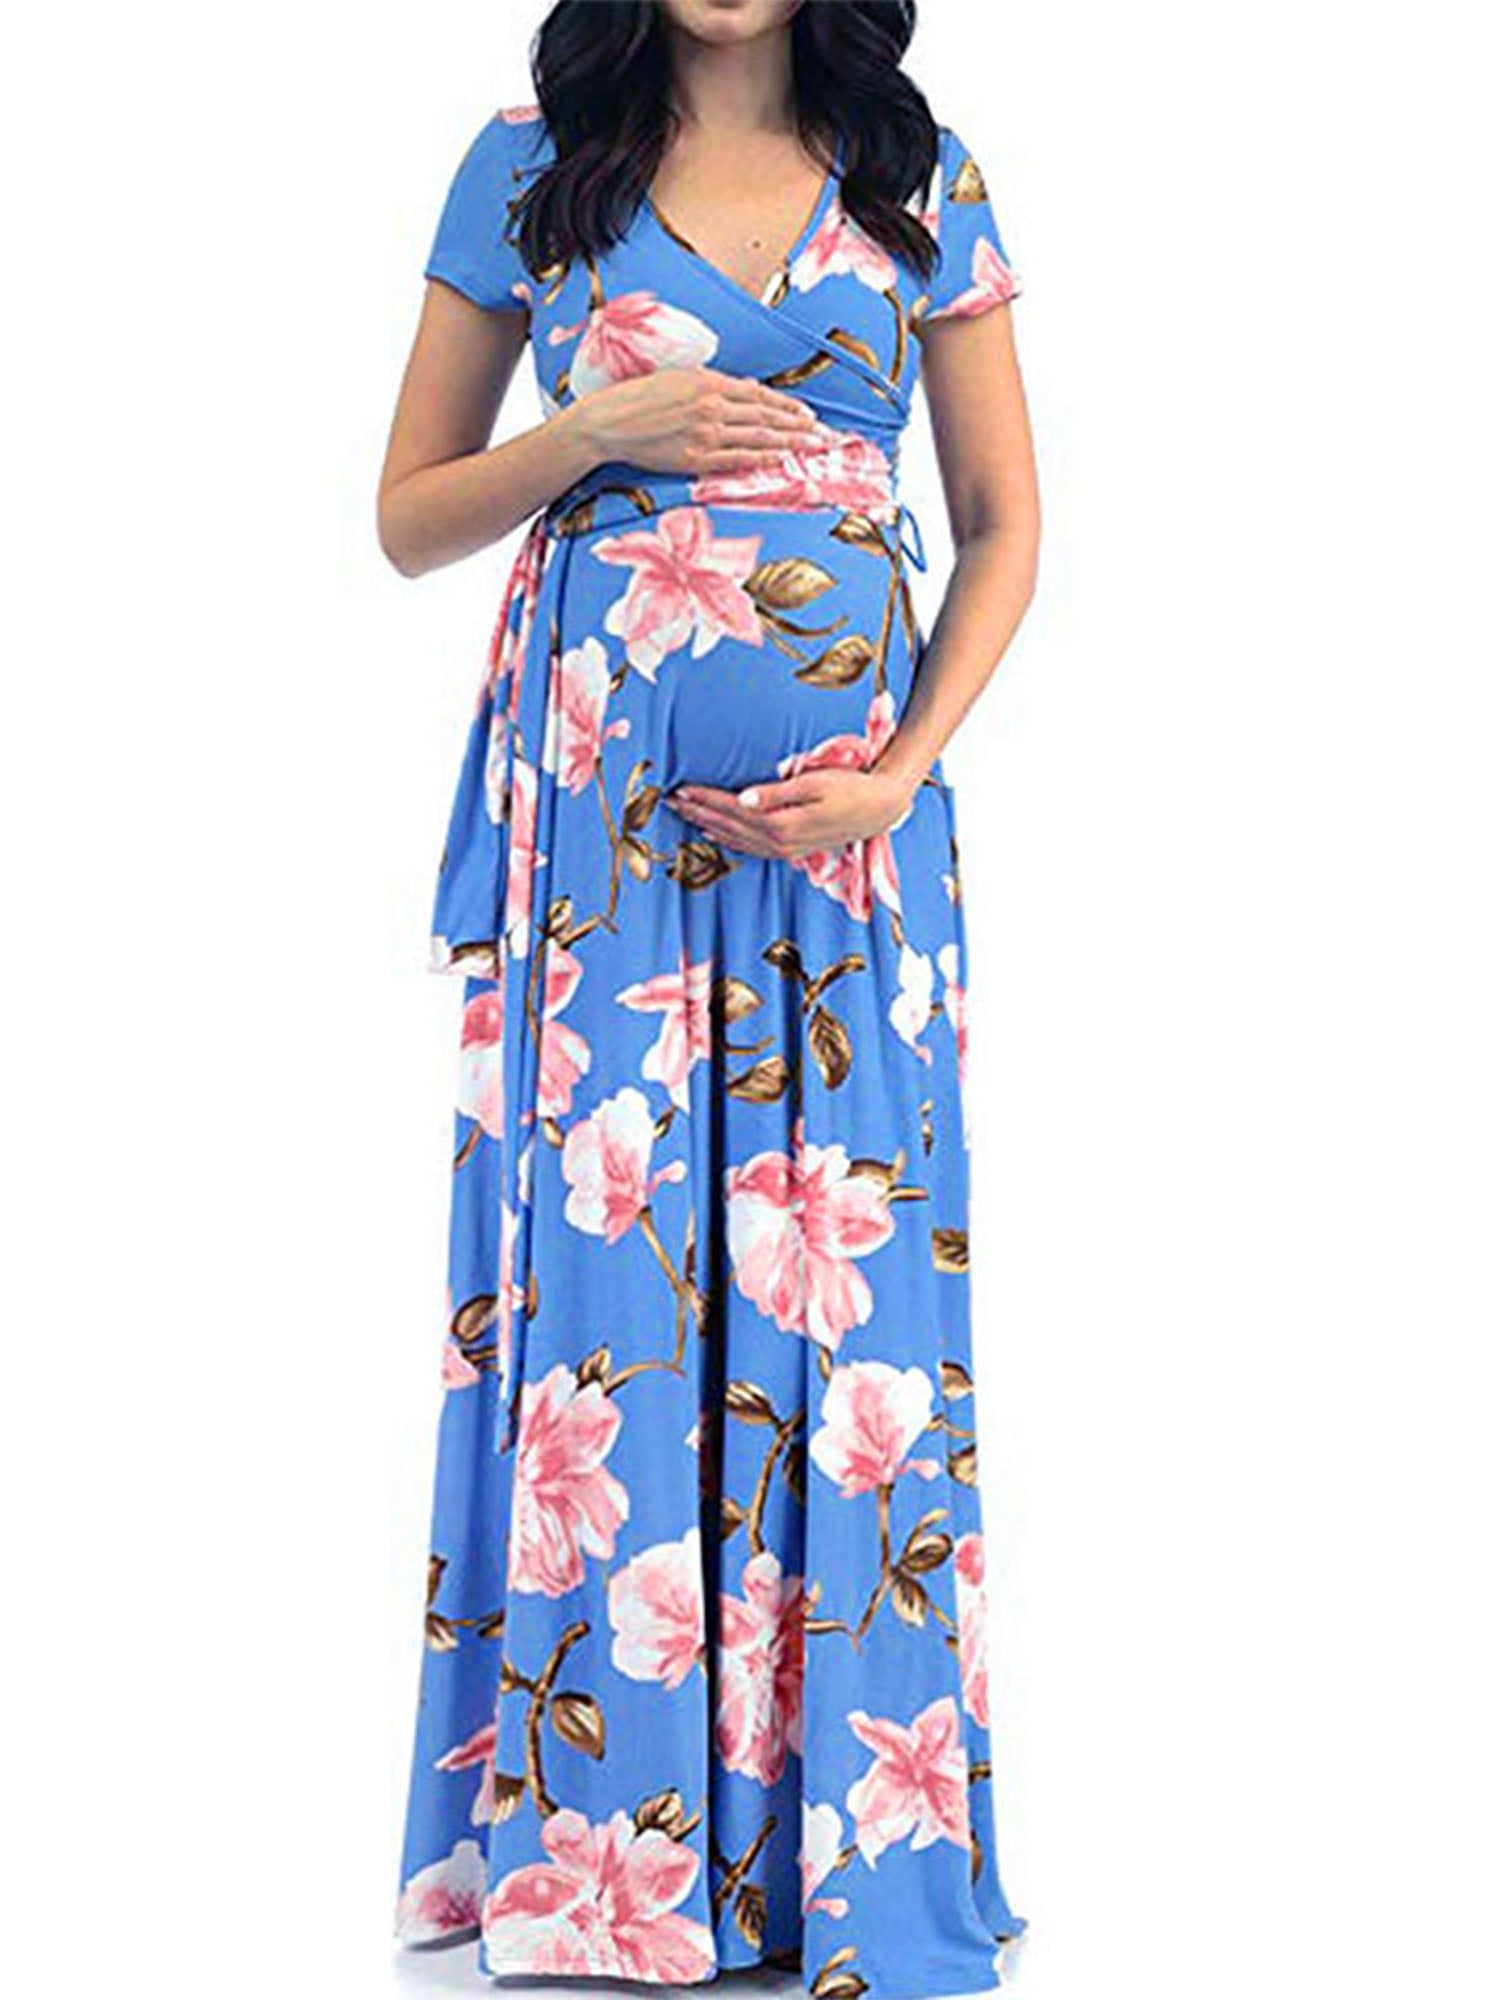 Made in USA Wood Rose Womens Maternity Open Shoulder Dress in Floral Print